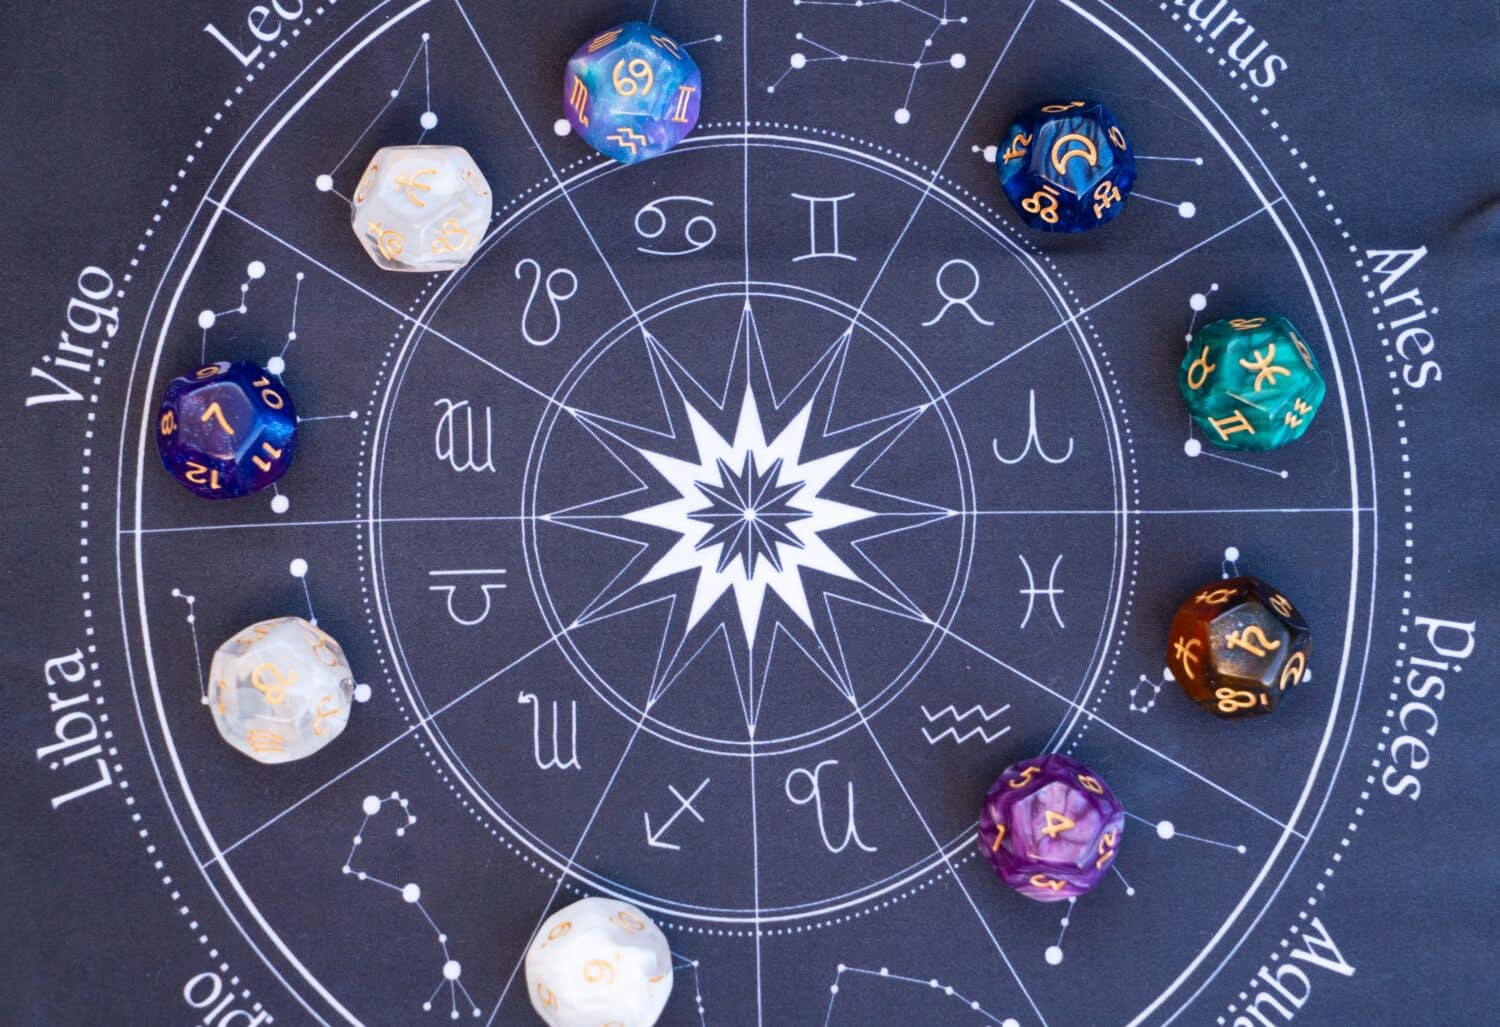 Horoscope zodiac circle with divination dice, top view. Fortune telling and astrology predictions concept, magic rituals and exoteric experience